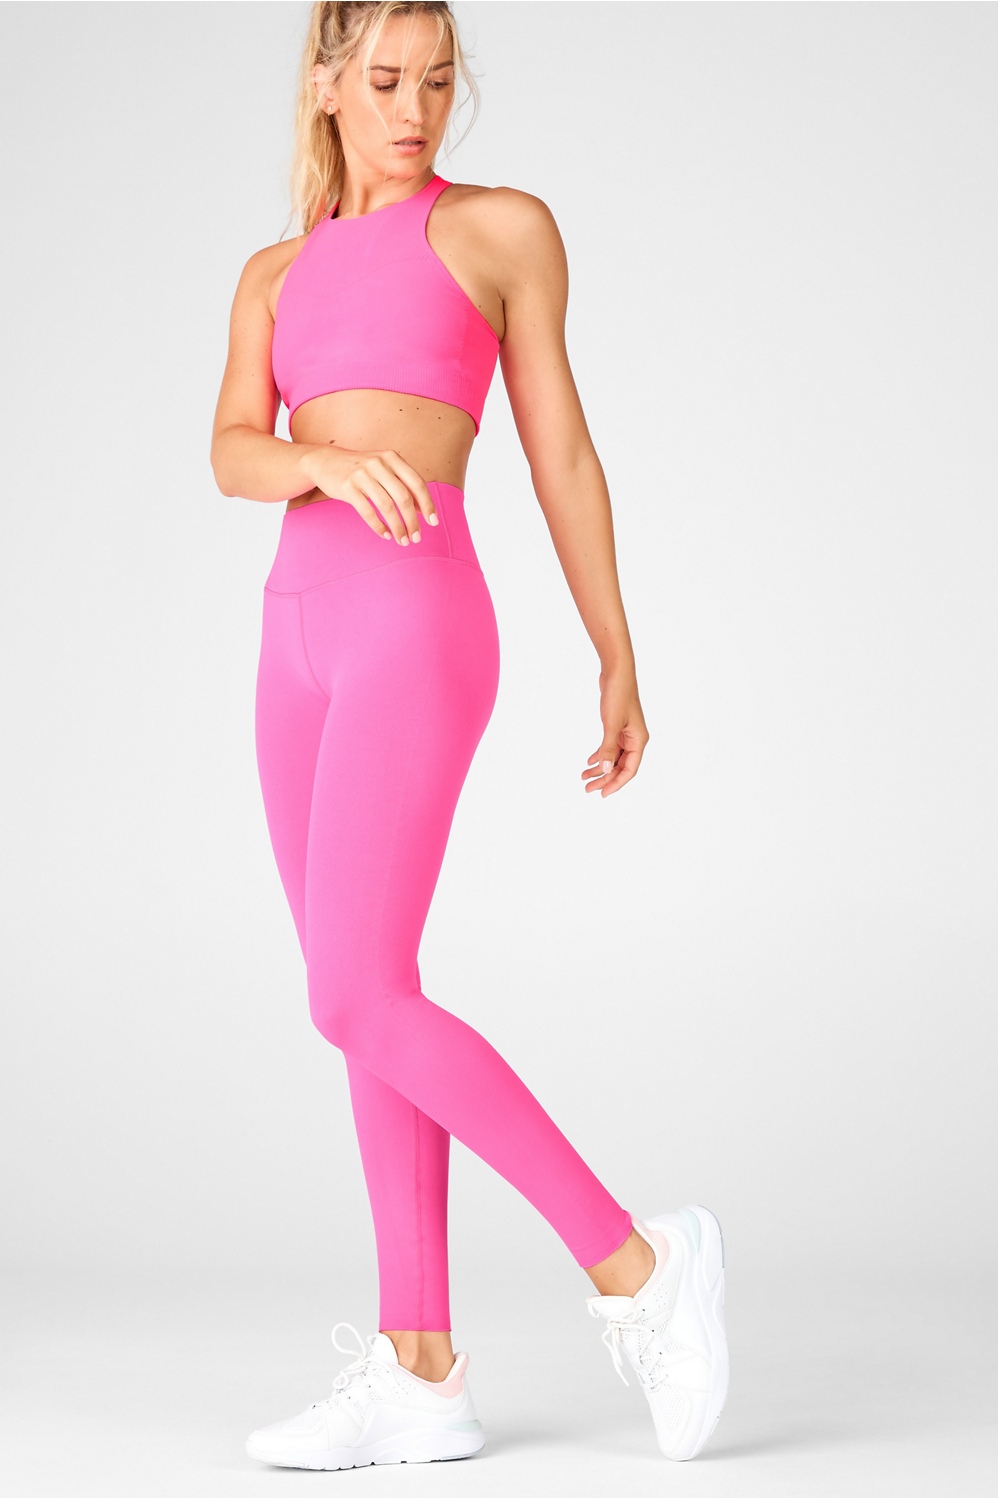 Fabletics Womens Sync High Waisted Perforated Pink 7/8 Leggings. Large. $59